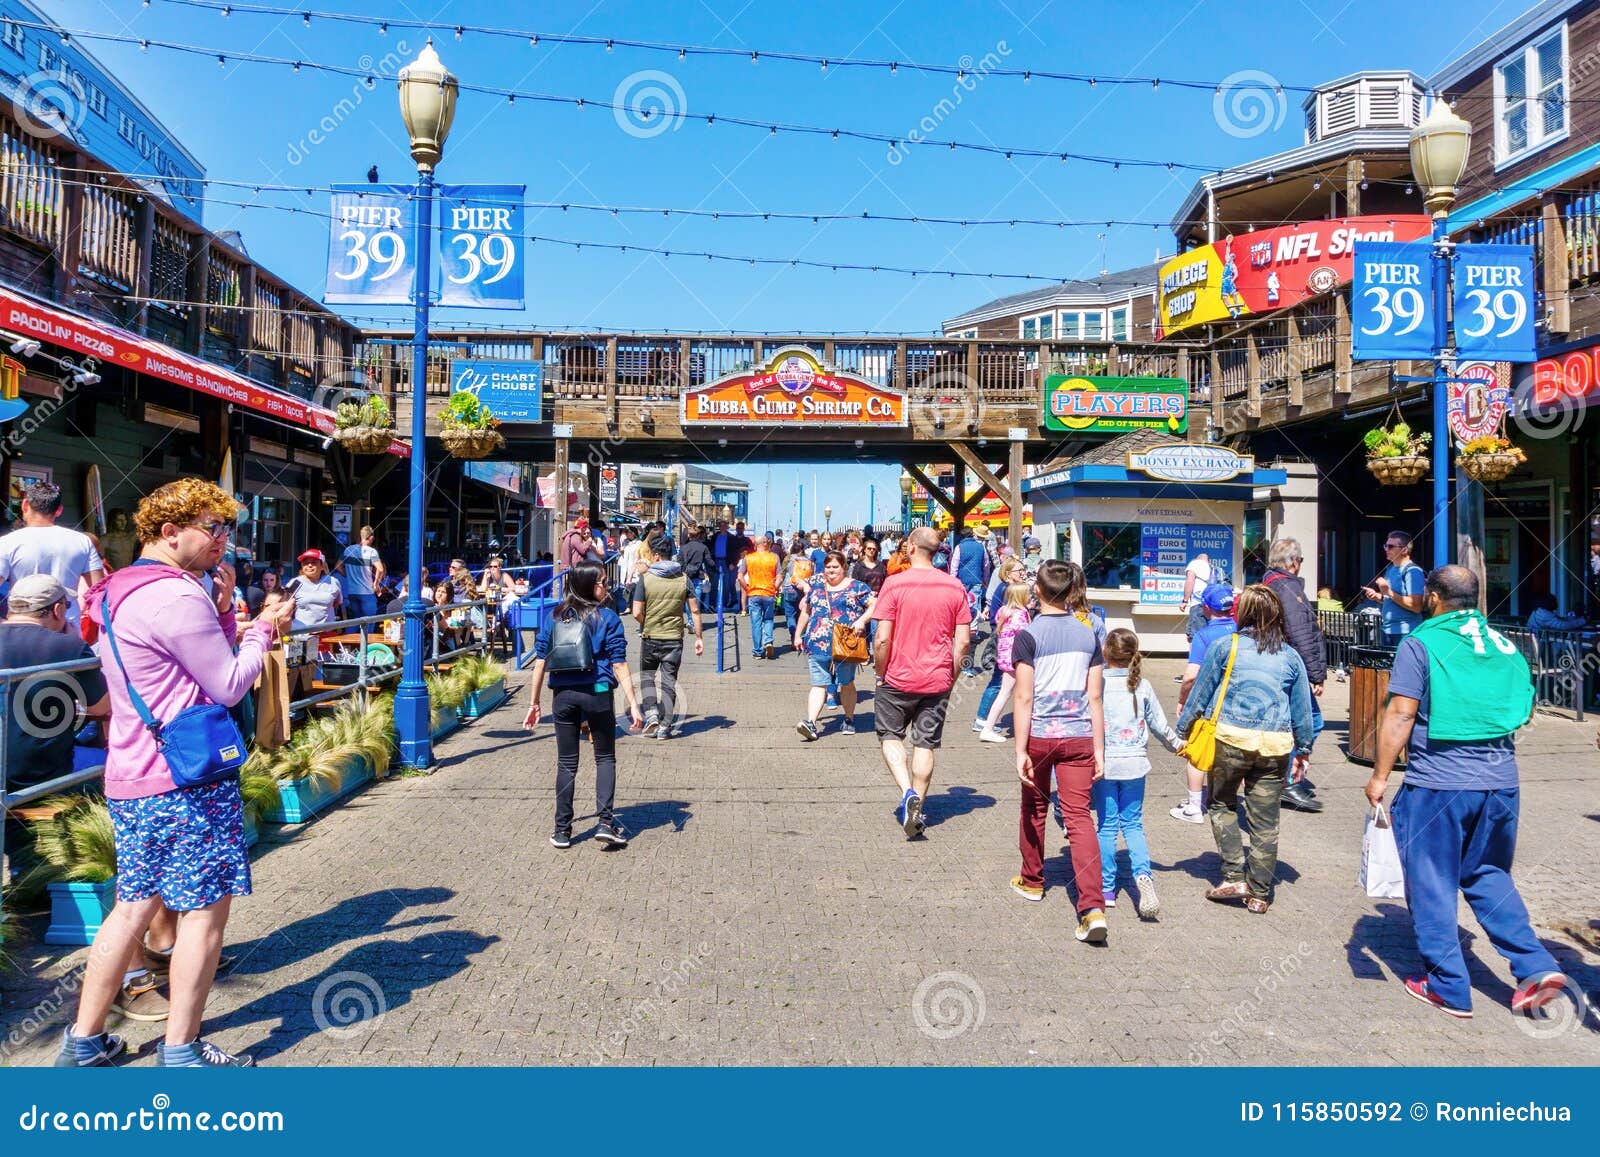 Pier 39 in Fisherman's Wharf - Tours and Activities